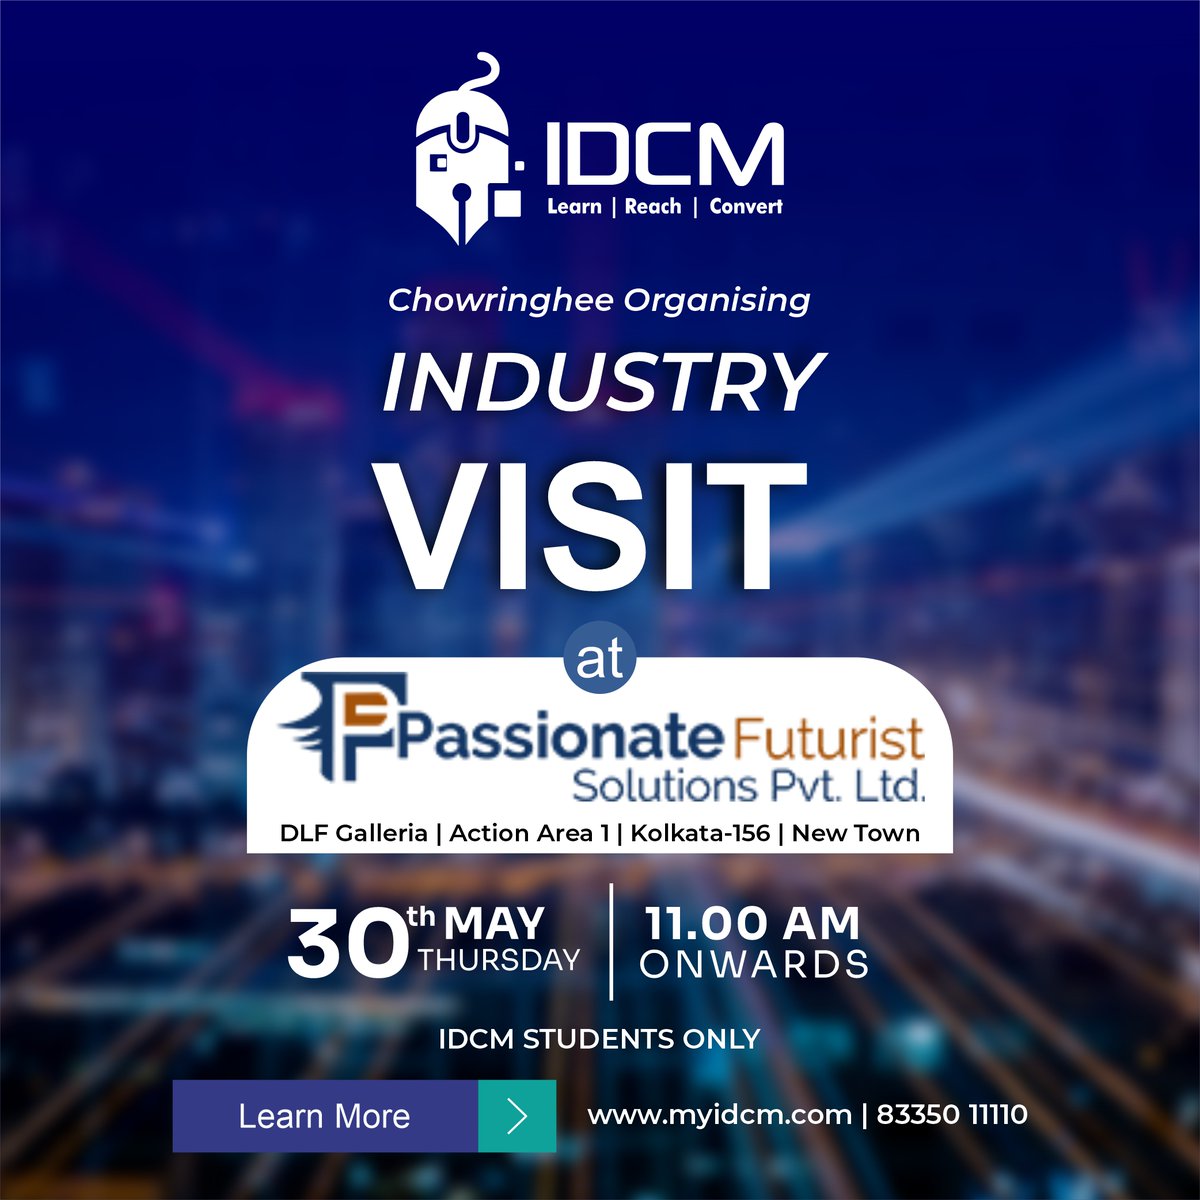 IDCM, Chowringhee is organizing an Industry Visit
We are excited to announce an Industry Visit at Passionate Futurist on 30th May at 11 PM.
Don’t miss out on this amazing opportunity!

#myIDCM #DigitalMarketing #JobOpportunities #DigitalMarketer #indusrtyvisit #practicalexposure